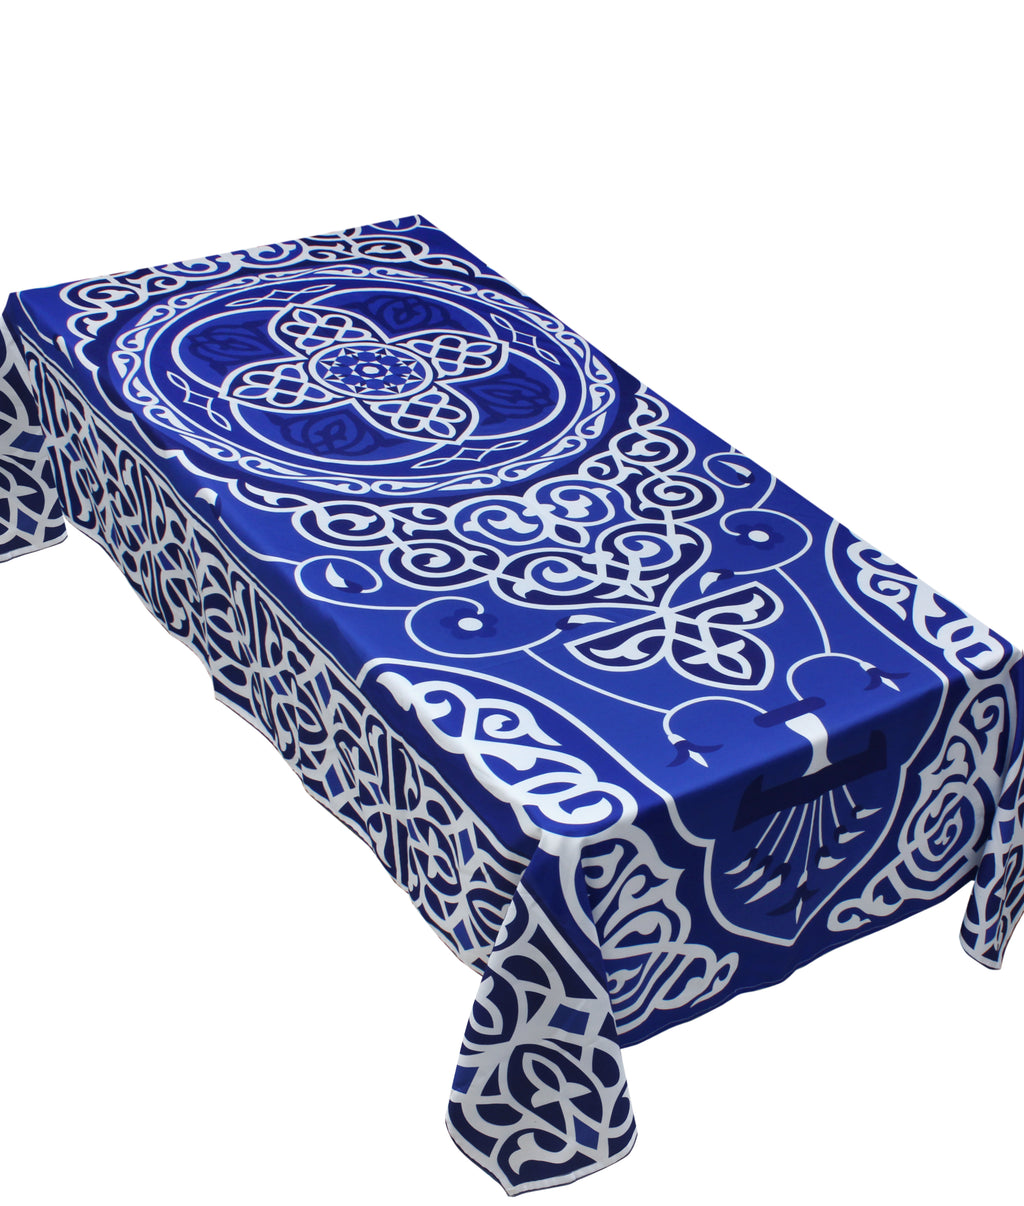 The blue khayameya table cover